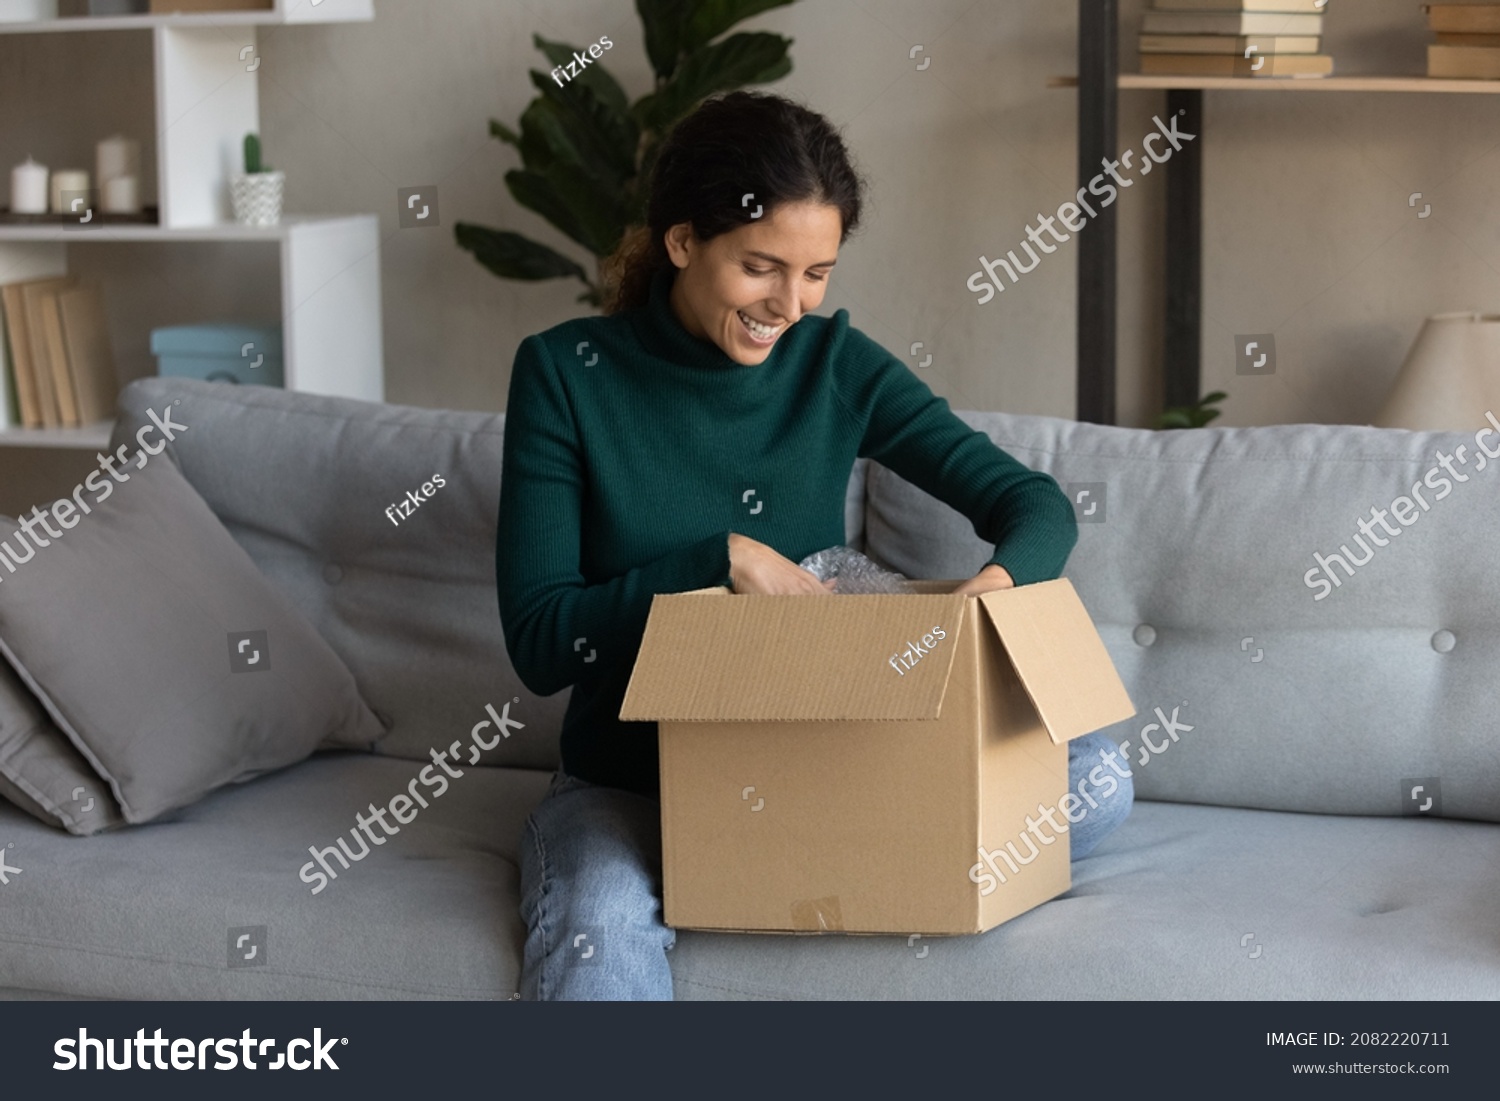 Ecommerce. Satisfied young latin woman web shop customer sit on sofa open postal delivery package with consumer goods products ordered online. Happy millennial lady unpacking after moving to new home #2082220711